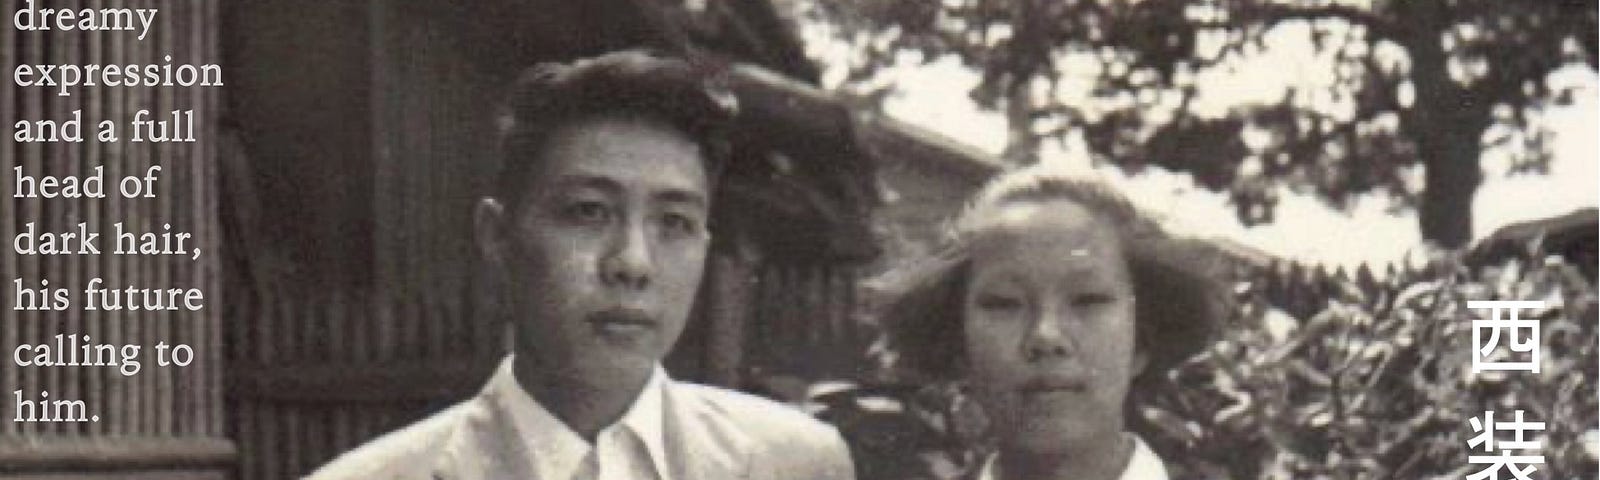 Black and white photo of a Chinese man in a blazer and dark hair standing next to a Chinese woman with a white blouse and dark short hair in the forefront and a wood structure and tree in background.